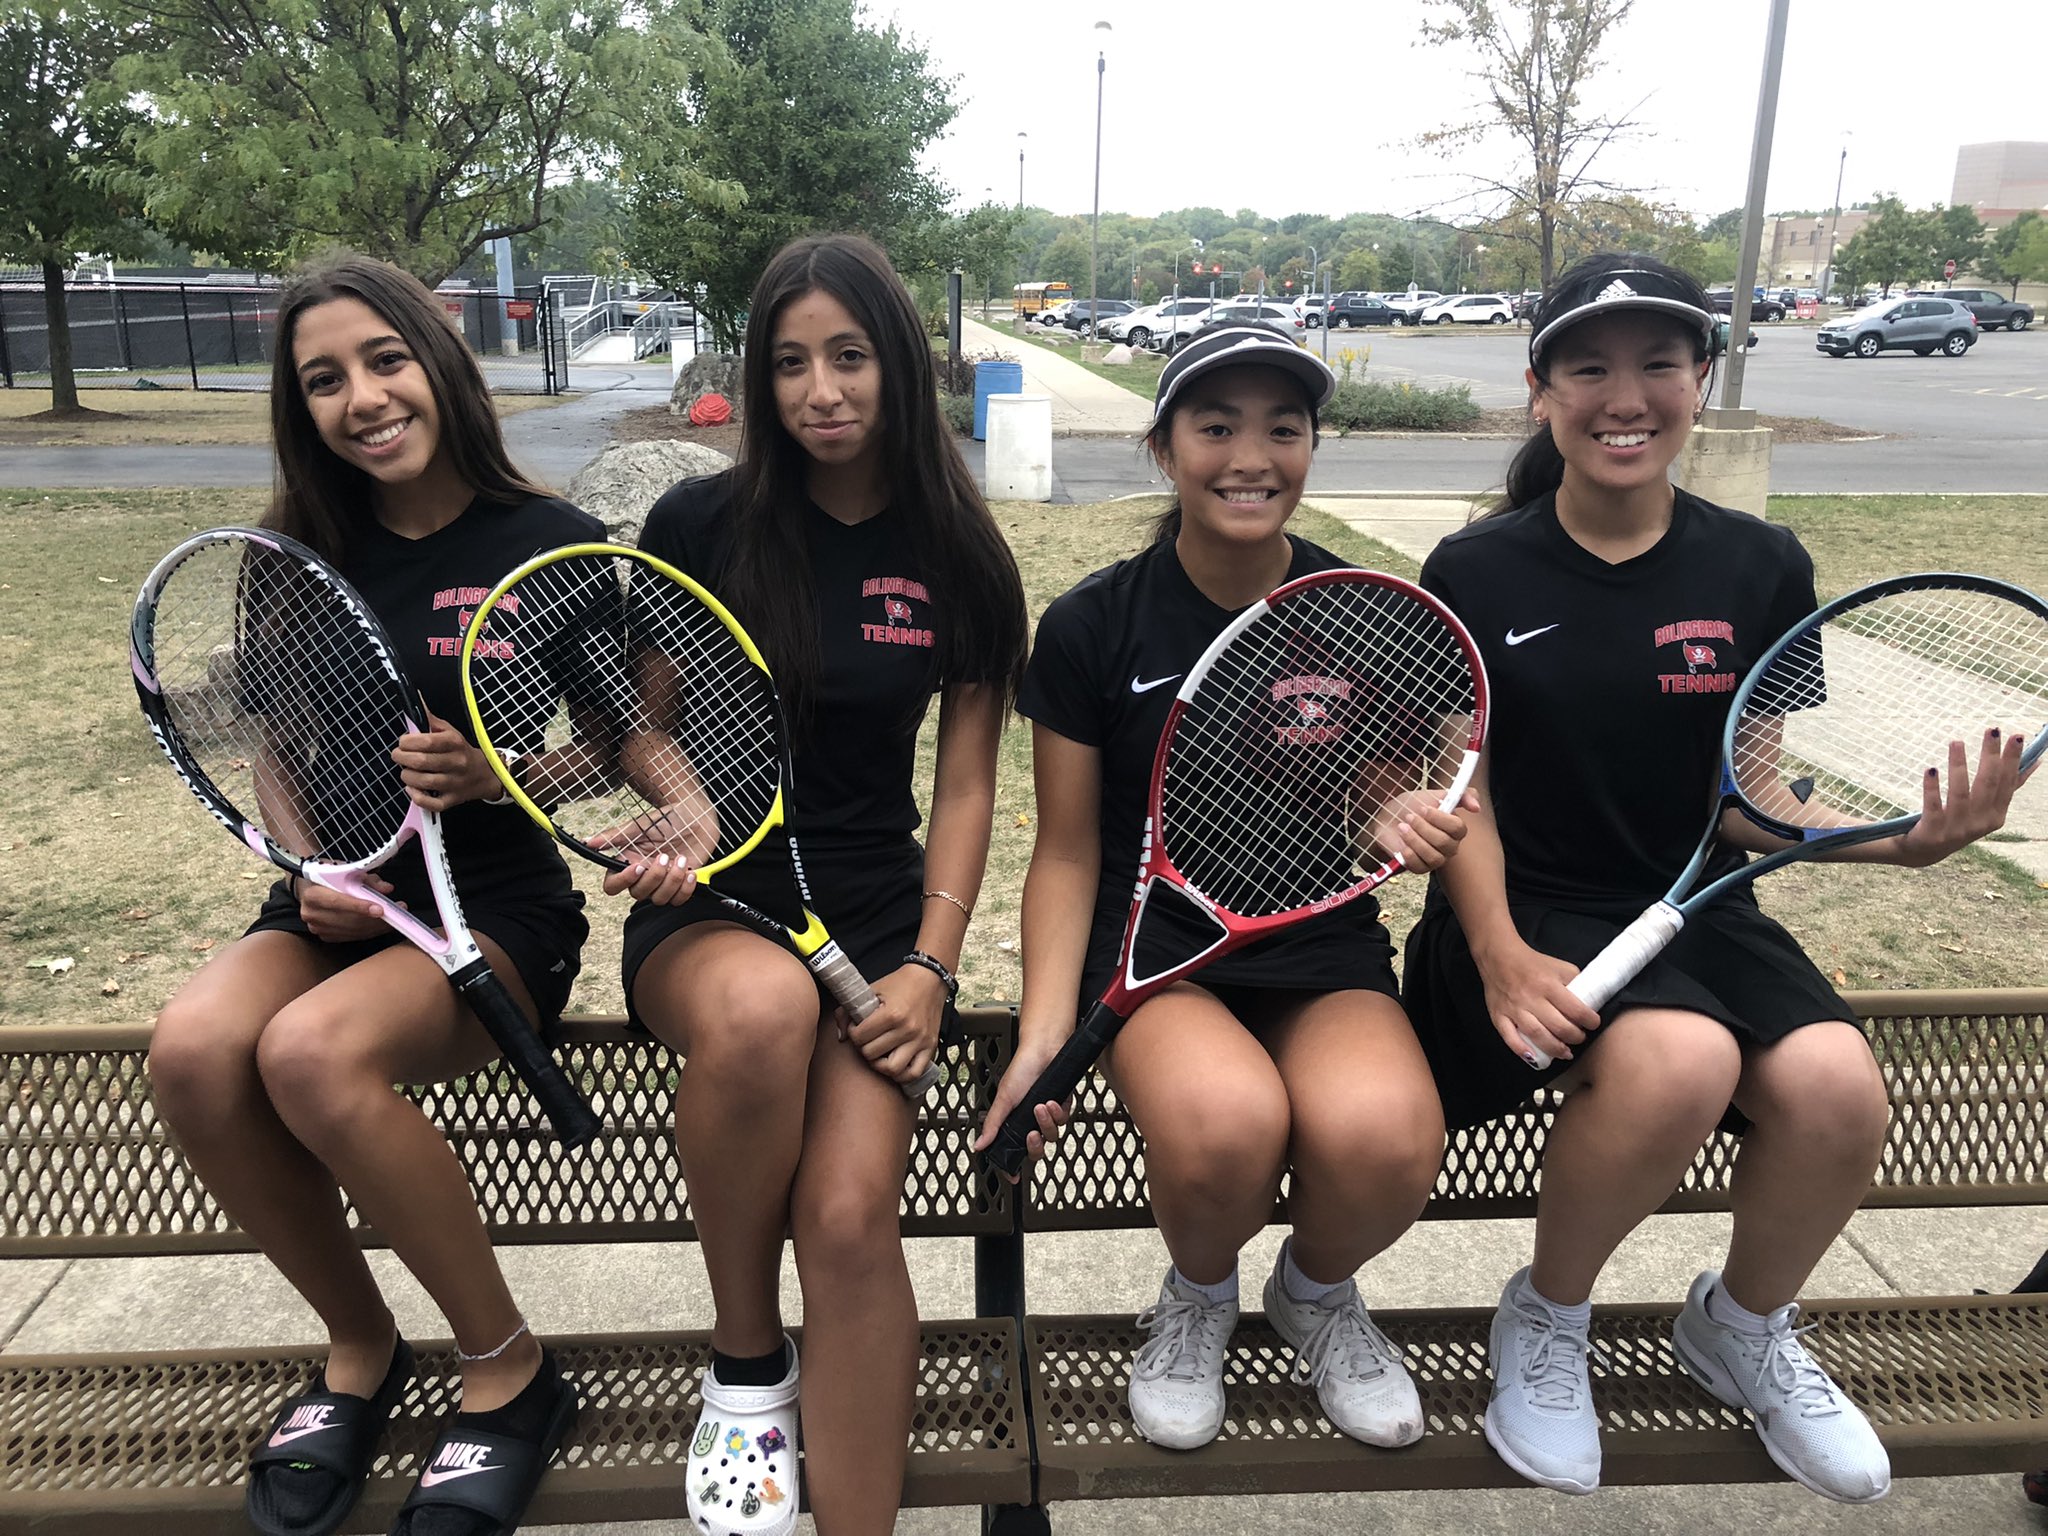 Bolingbrook Tennis Twitter: "Our winners against Joliet West today! 🤩 #TheBrook https://t.co/kxuiUsecDD" Twitter